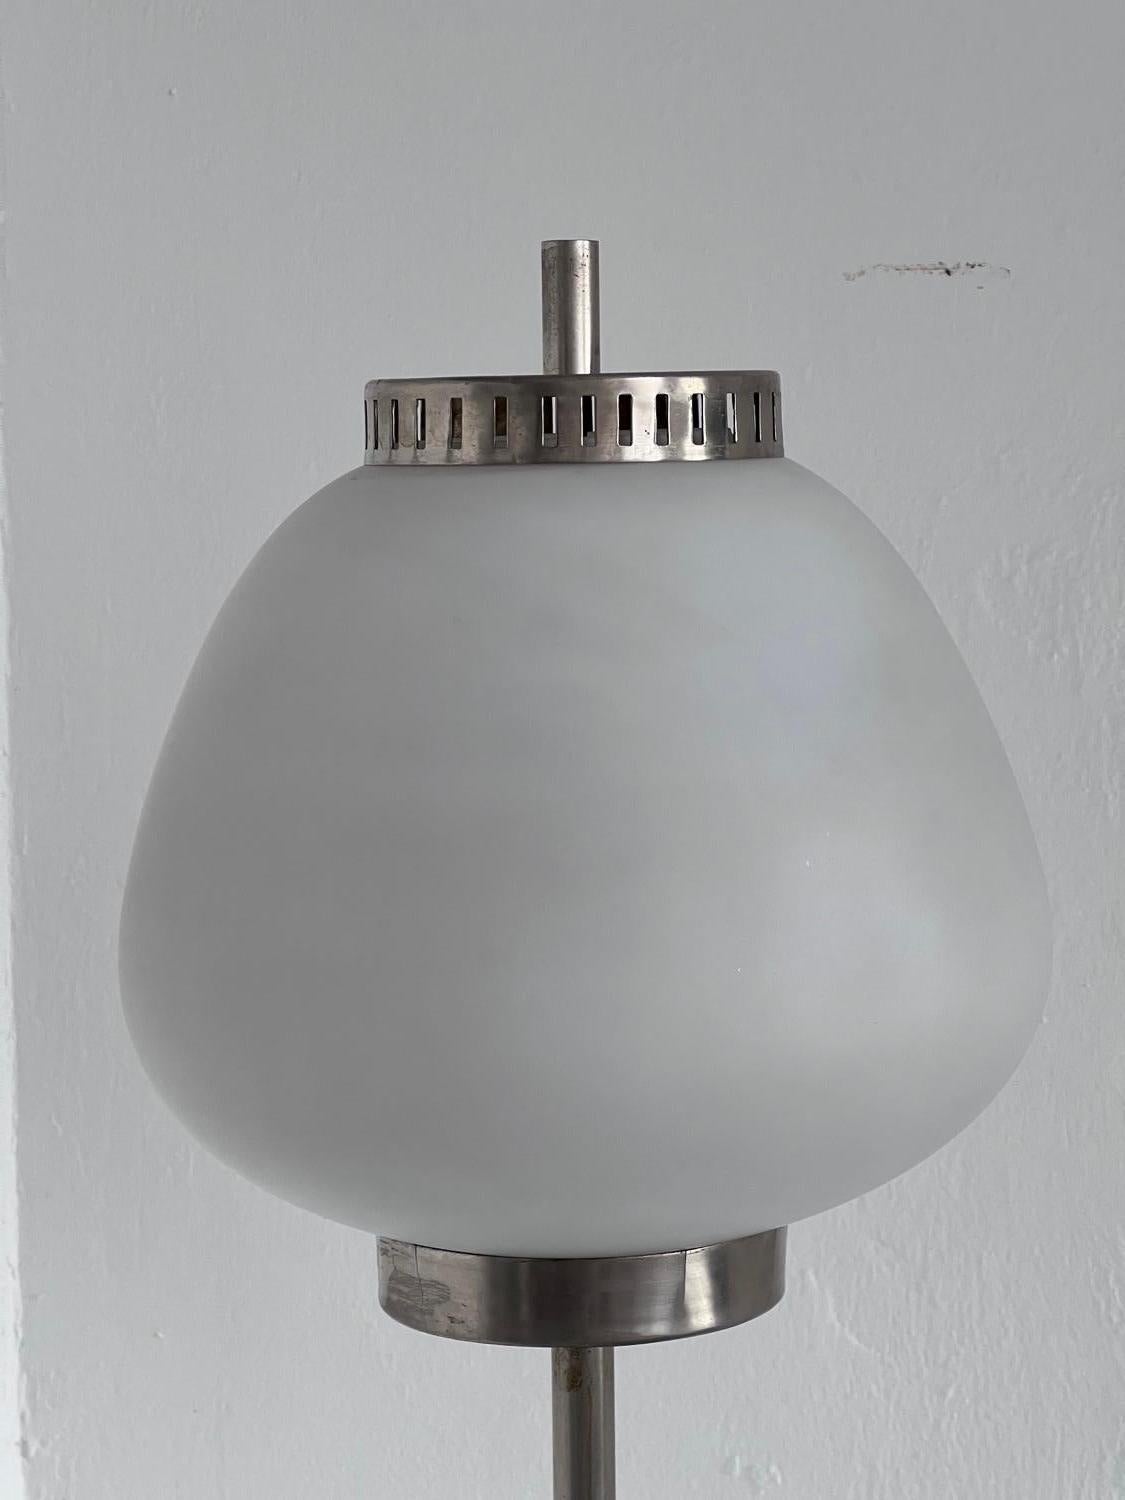 Italian Stilnovo Floor Lamp in Metal, Marble and Opaline Glass, 1950s Rare Decorative For Sale